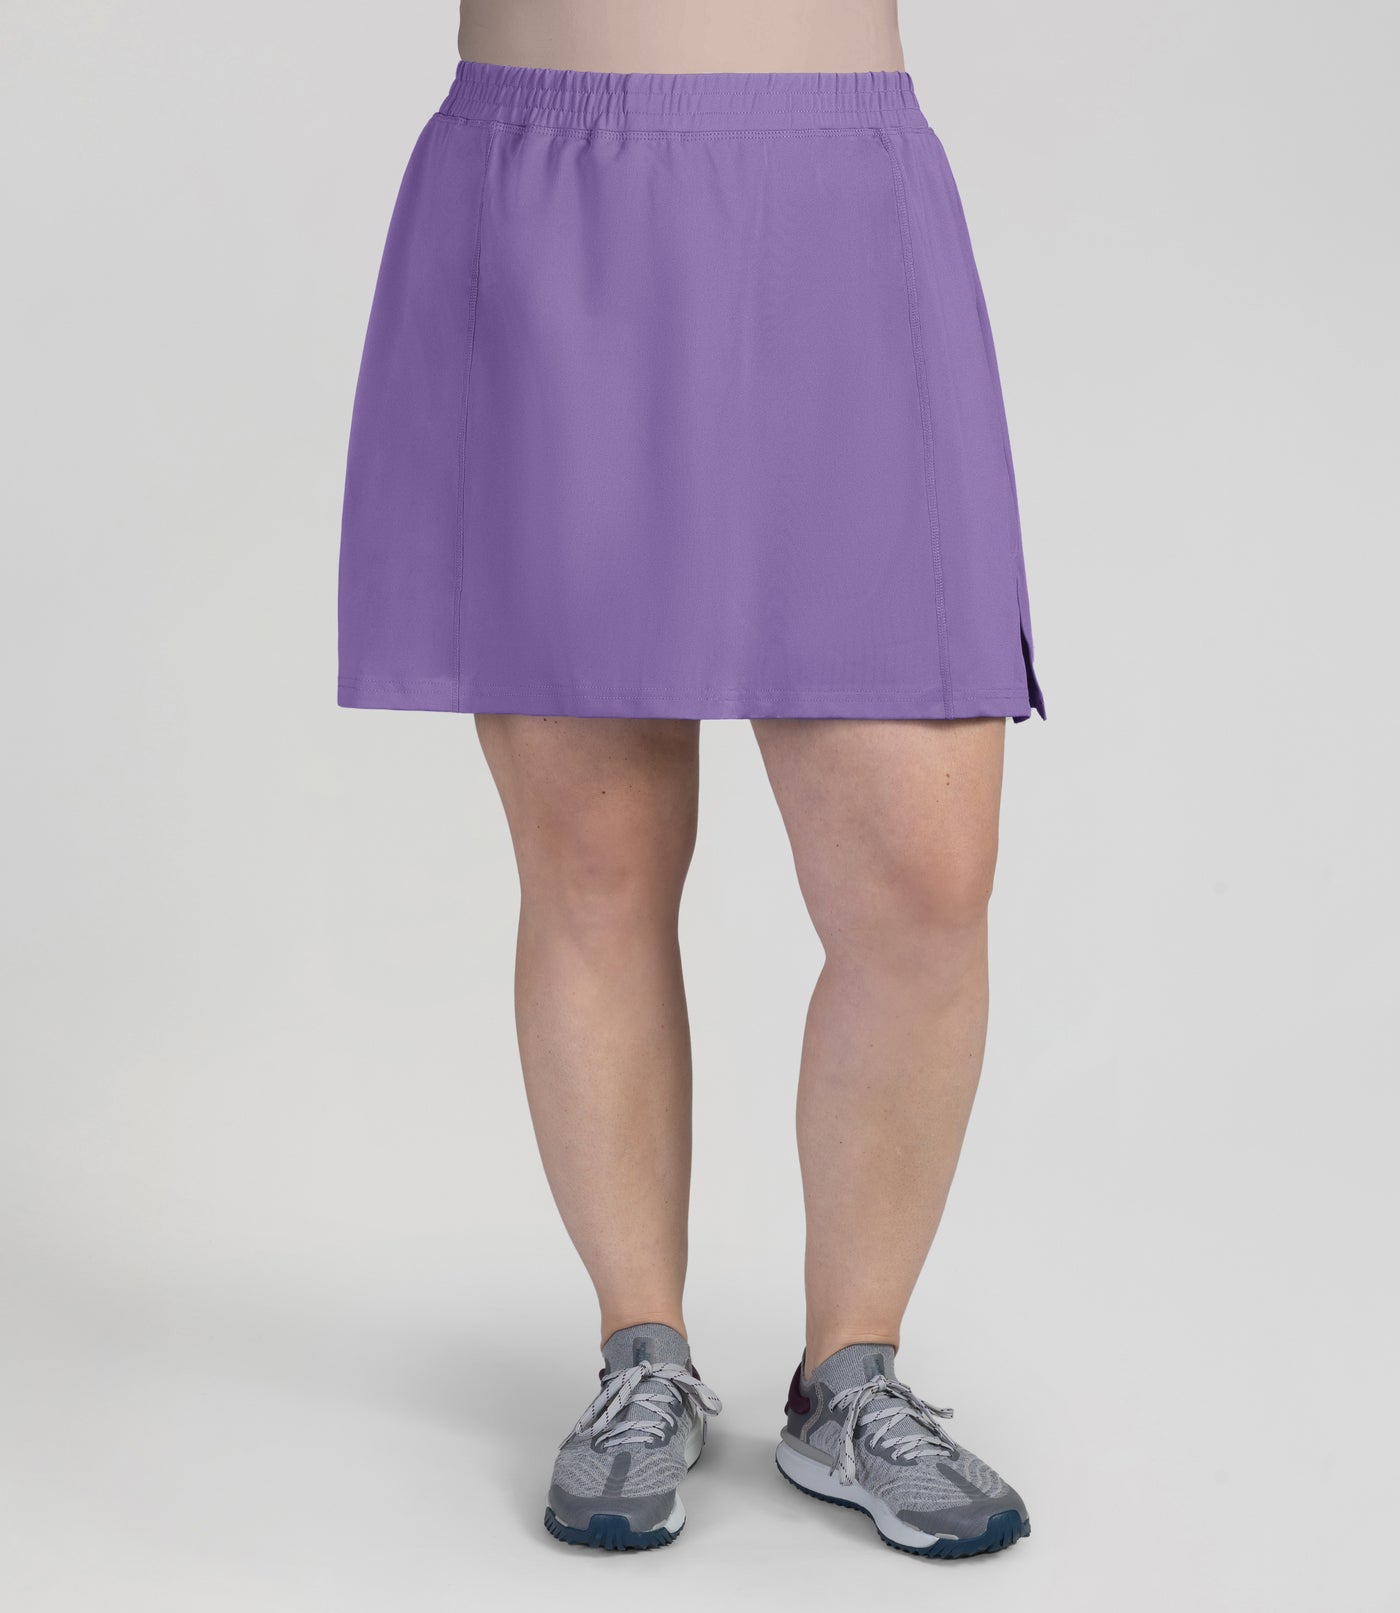 Bottom half of plus sized woman, front view, wearing JunoActives Quikwik lite skirted short in color iris. Skirt hem is a few inches above knee.